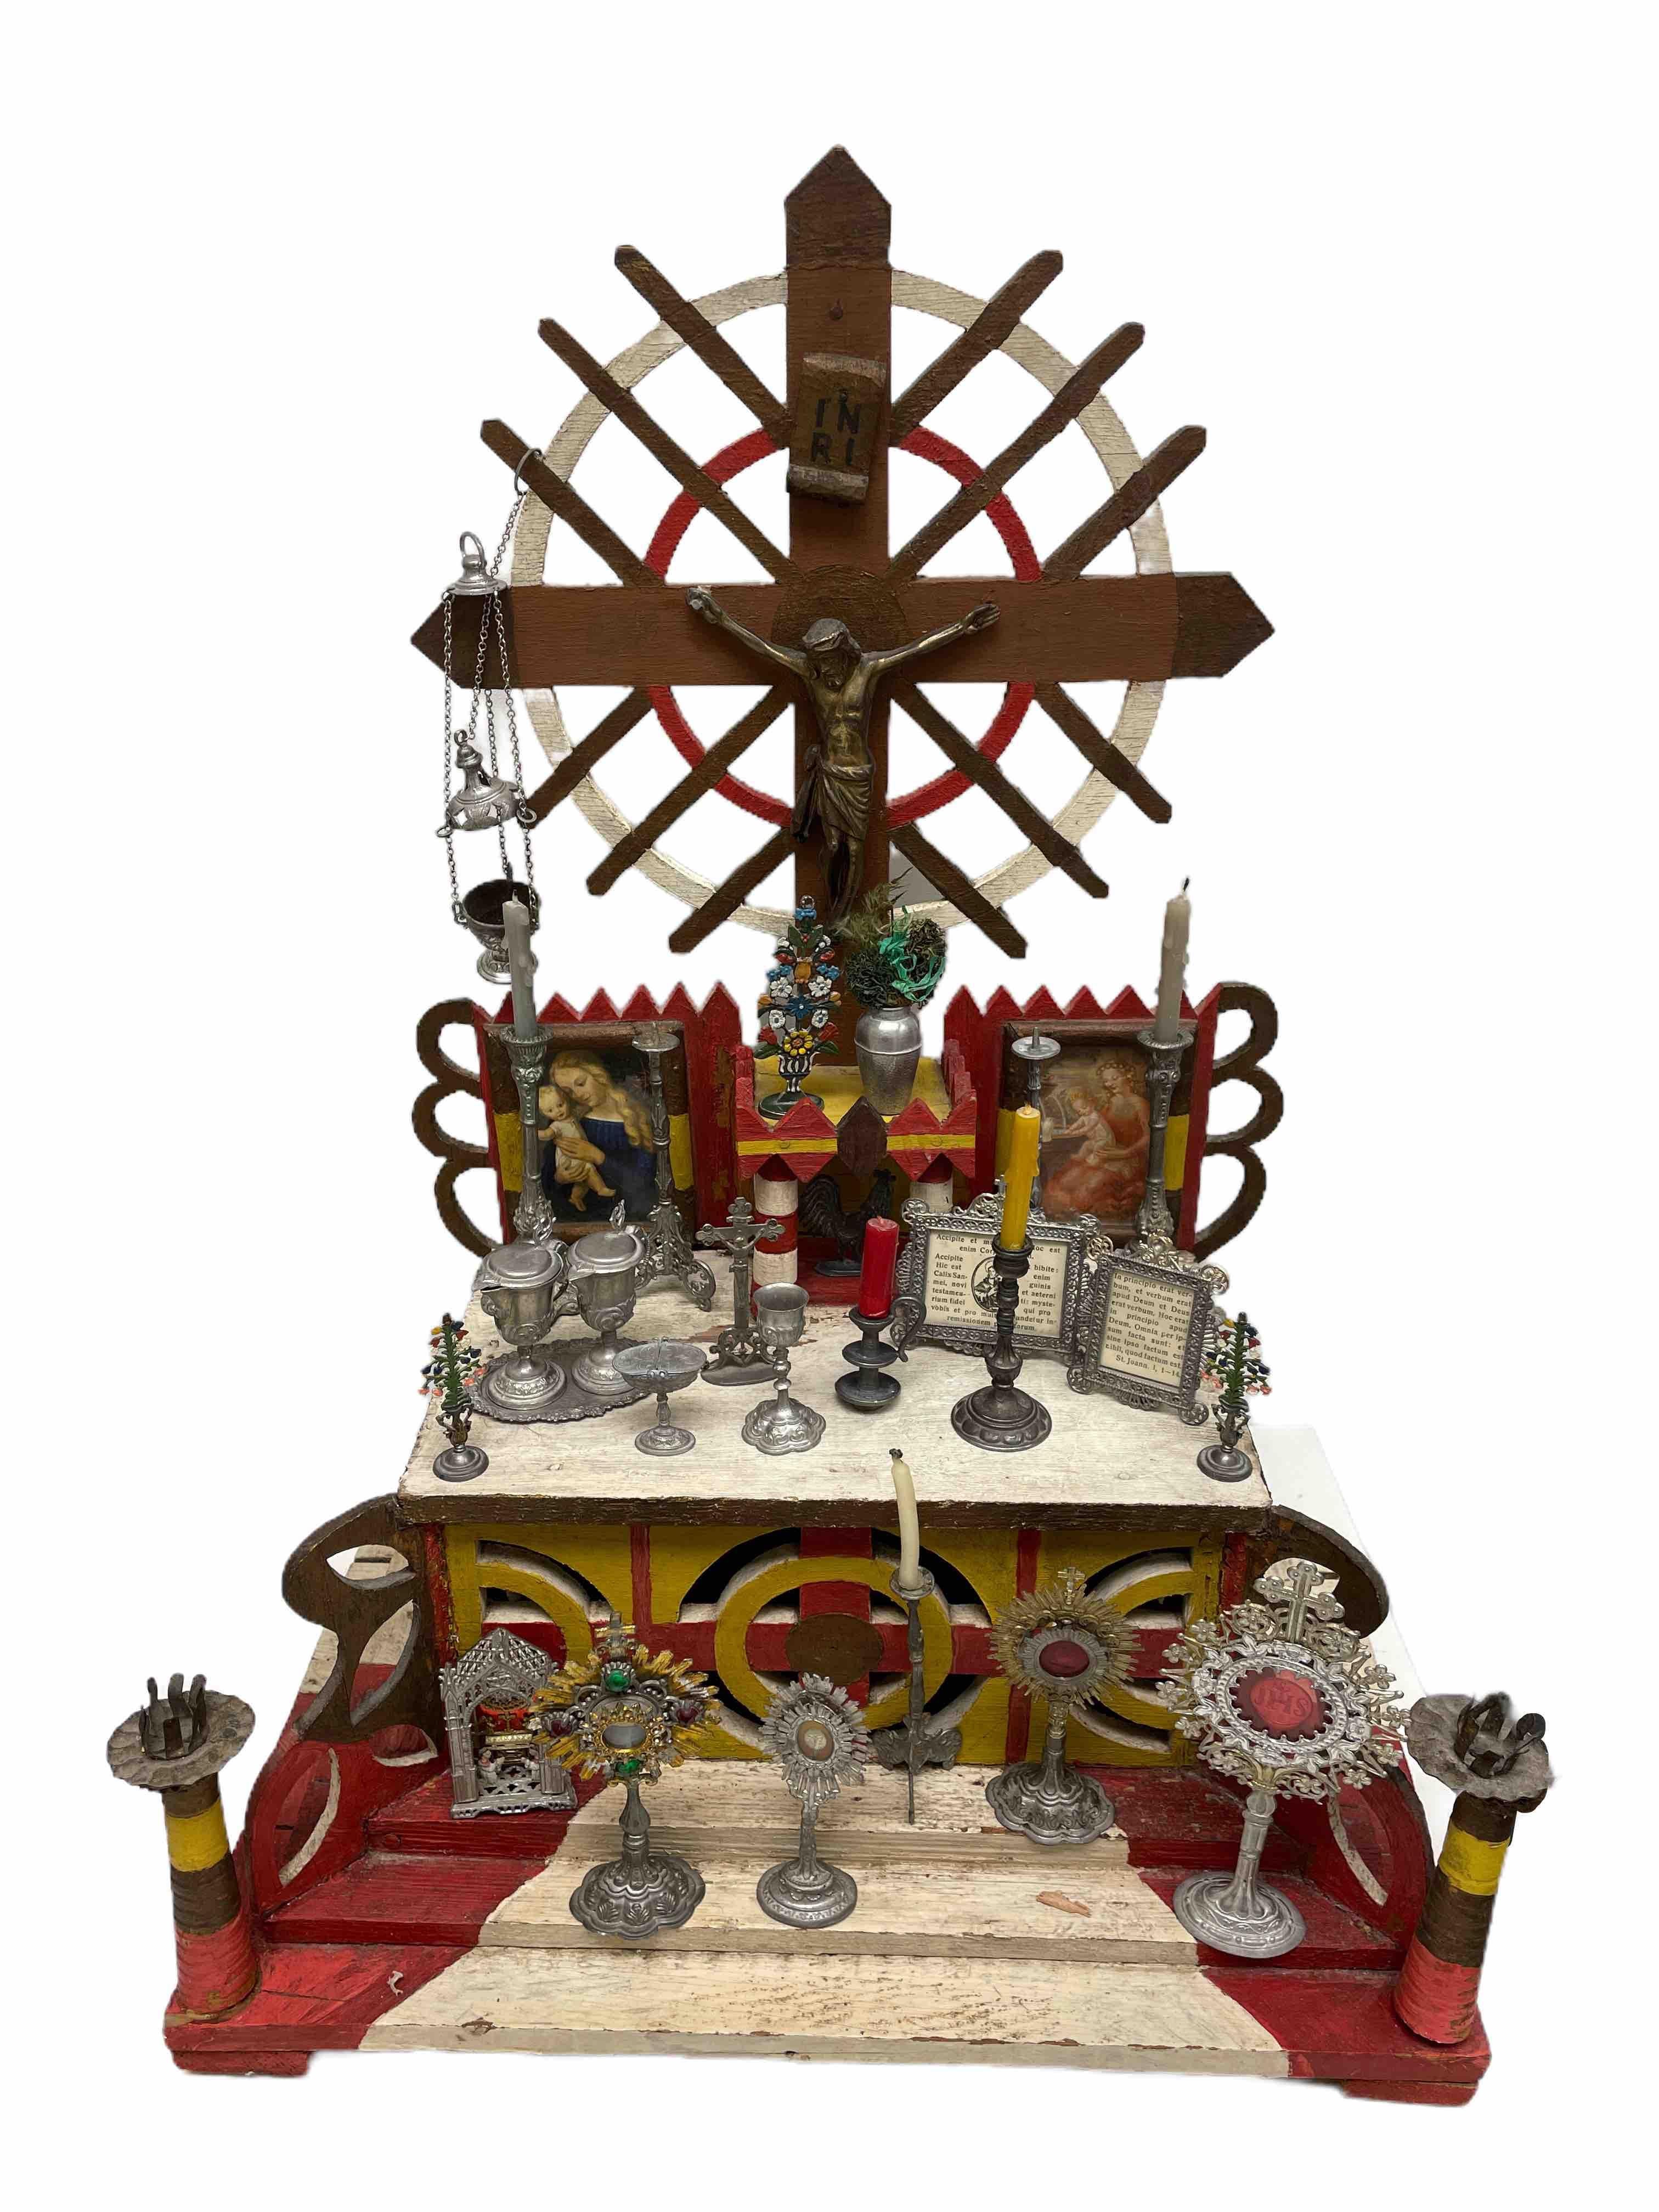 Here I have to offer a fine antique classic early 20th century hand crafted and hand painted House Altar with a lot of Christianity miniatures and accessories. A wonderful decorative appeal! It was made in the Franconia Area in Germany near